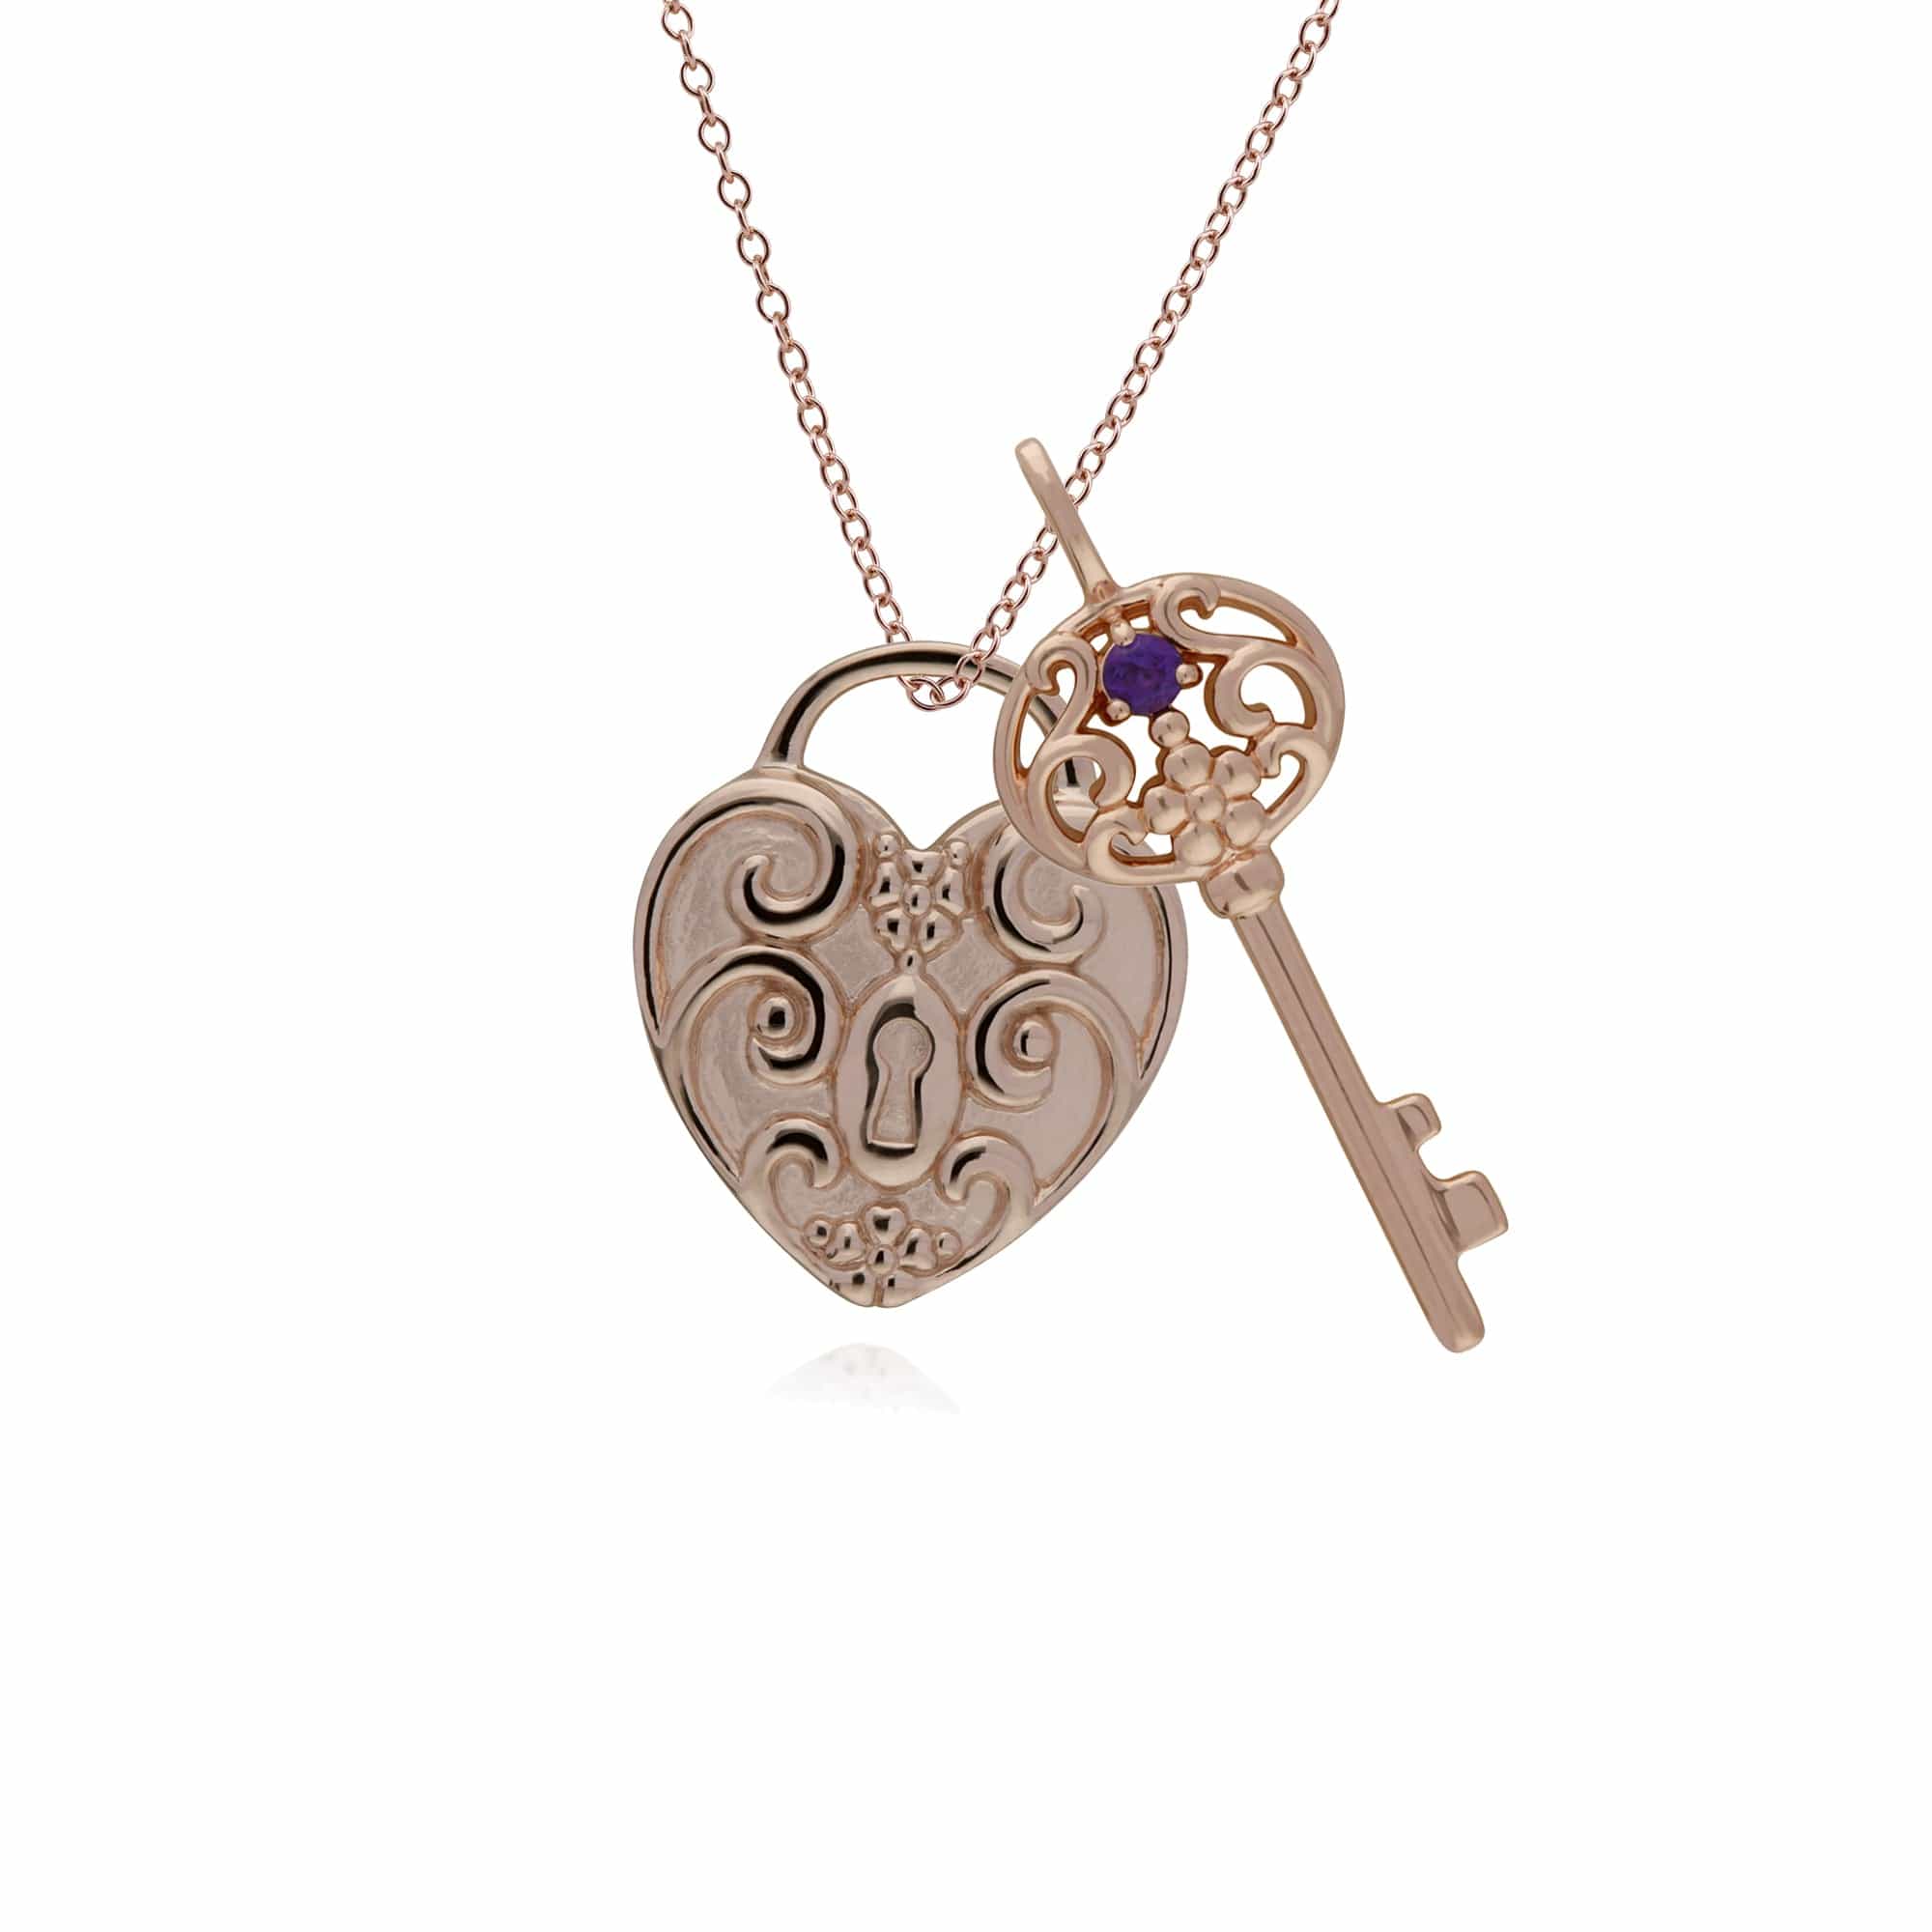 270P026705925-270P026501925 Classic Swirl Heart Lock Pendant & Amethyst Big Key Charm in Rose Gold Plated 925 Sterling Silver 1